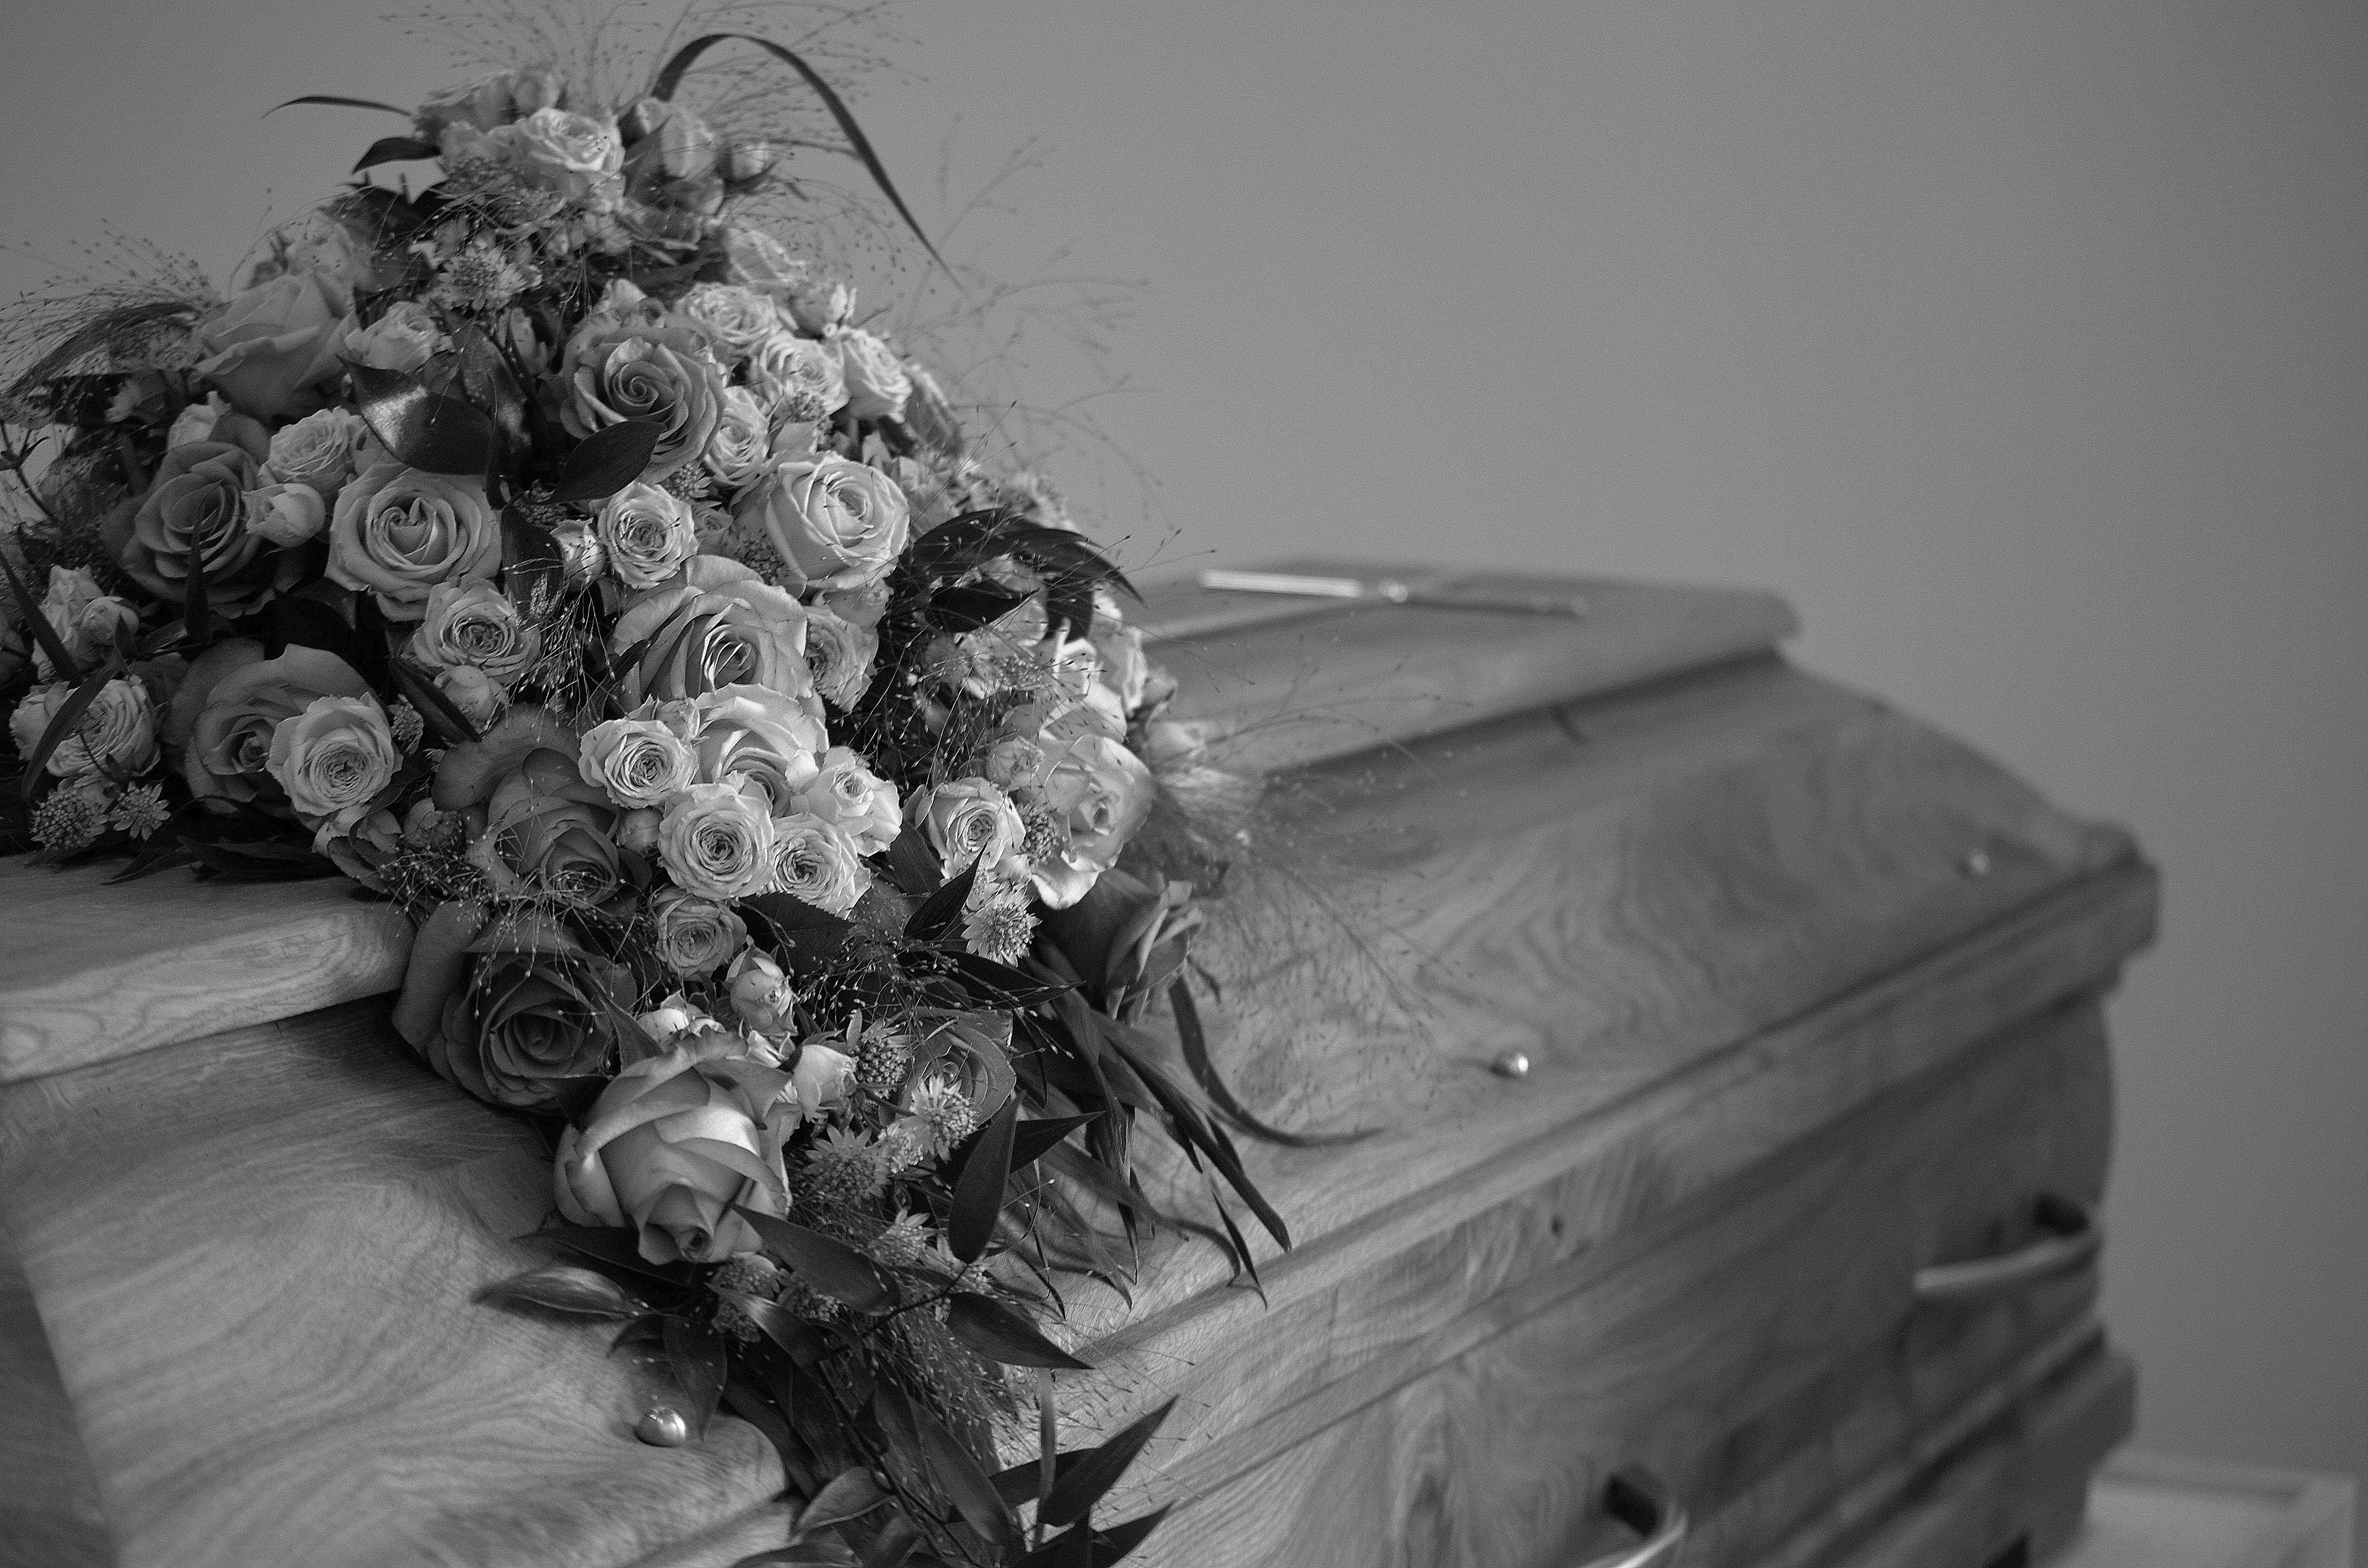 A black-and-white photo of a casket | Source: Pexels